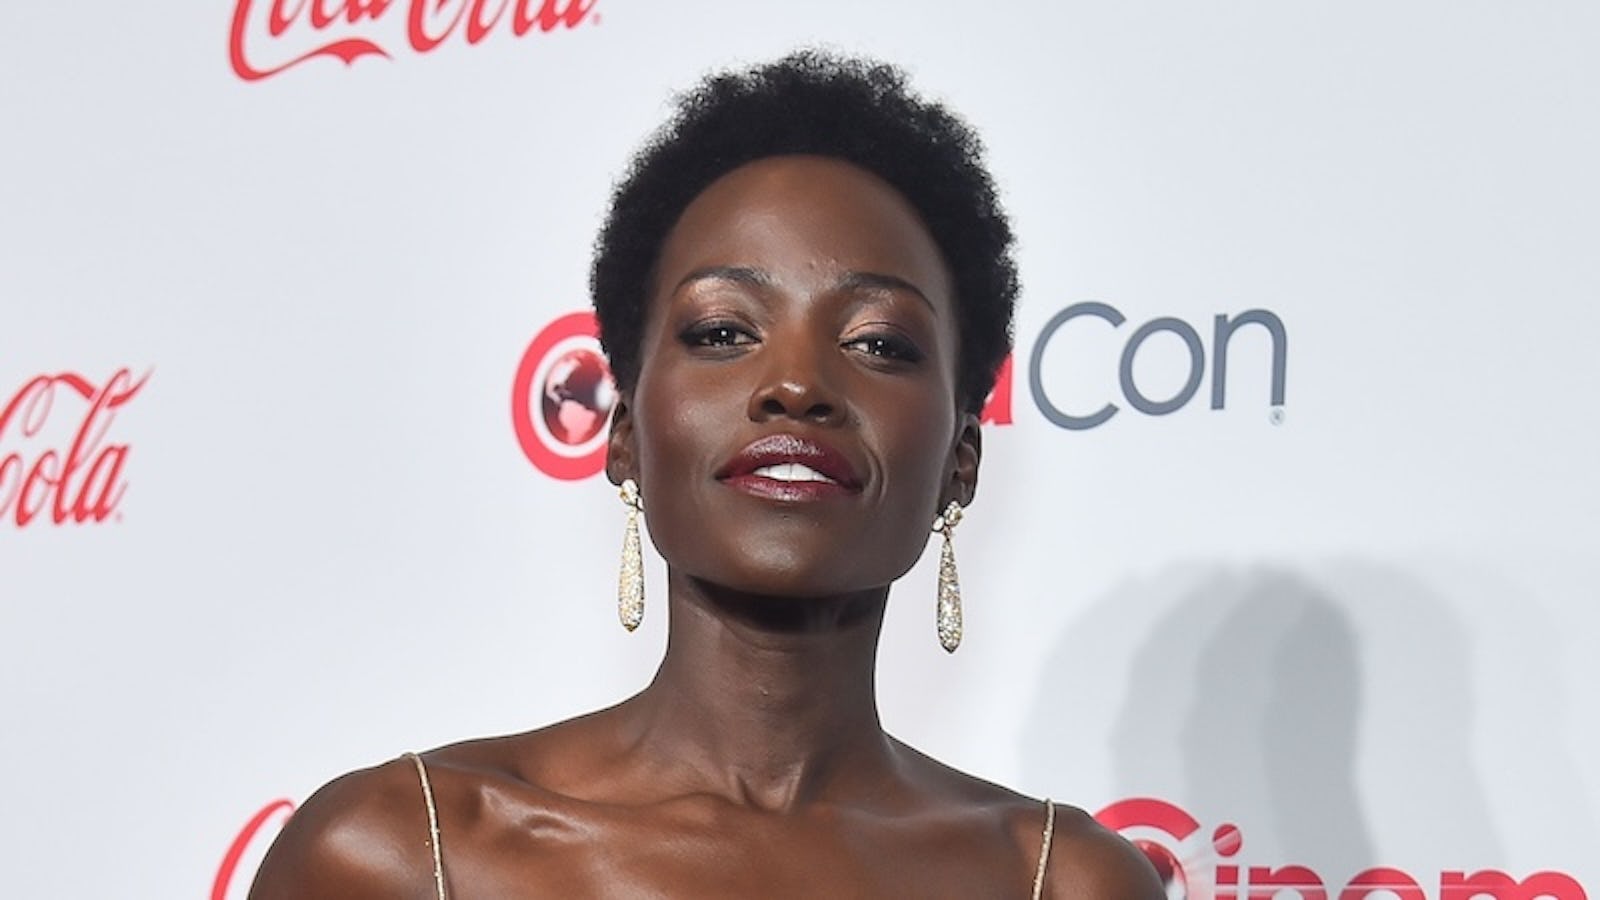 LAS VEGAS, NEVADA - APRIL 11: Lupita Nyong'o, recipient of the Star of the Year award, attends the CinemaCon Big Screen Achievement Awards brought to you by The Coca-Cola Company at Omnia Nightclub at Caesars Palace during CinemaCon, the official convention of the National Association of Theatre Owners, on April 11, 2024, in Las Vegas, Nevada. (Photo by Alberto E. Rodriguez/Getty Images for CinemaCon)